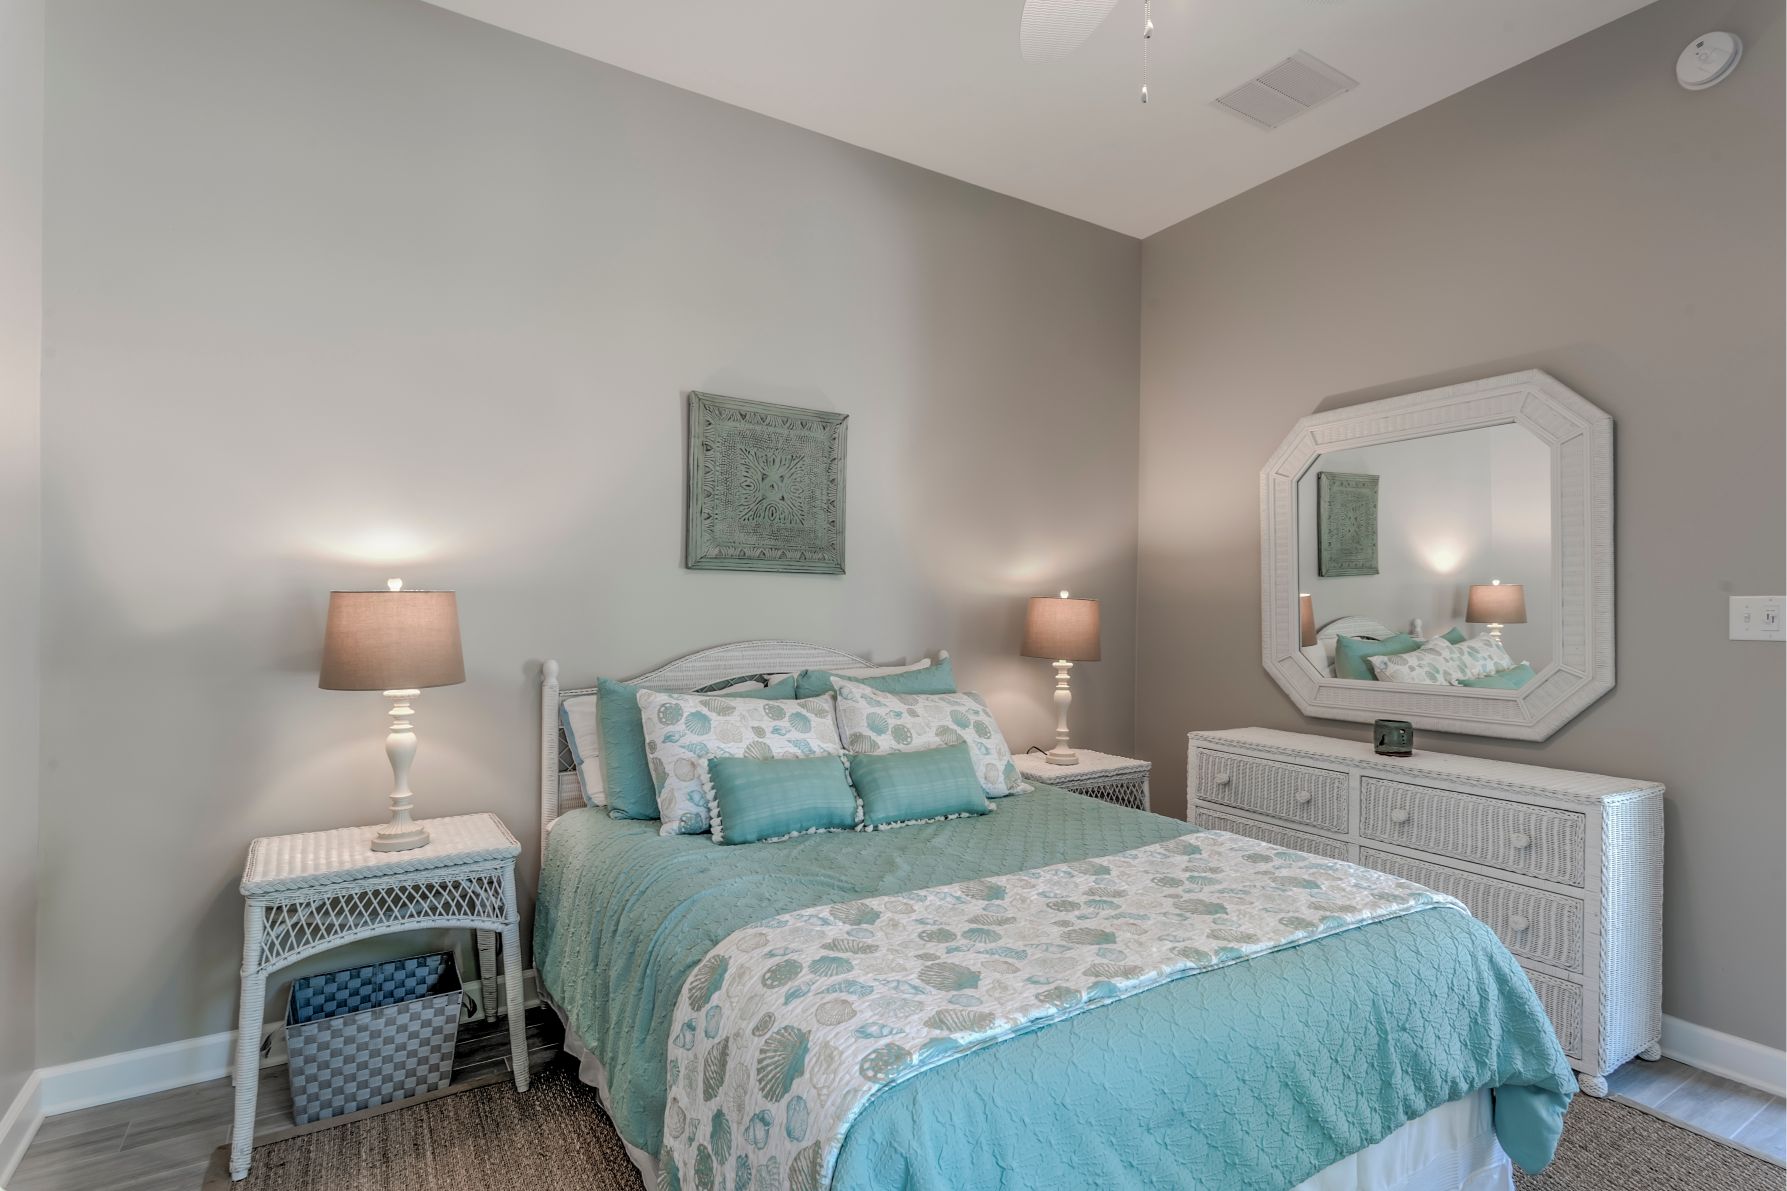 Addition in Juniper Court, Ocean Pines MD - Bedroom with Octagon Mirror and White Bedside Tables